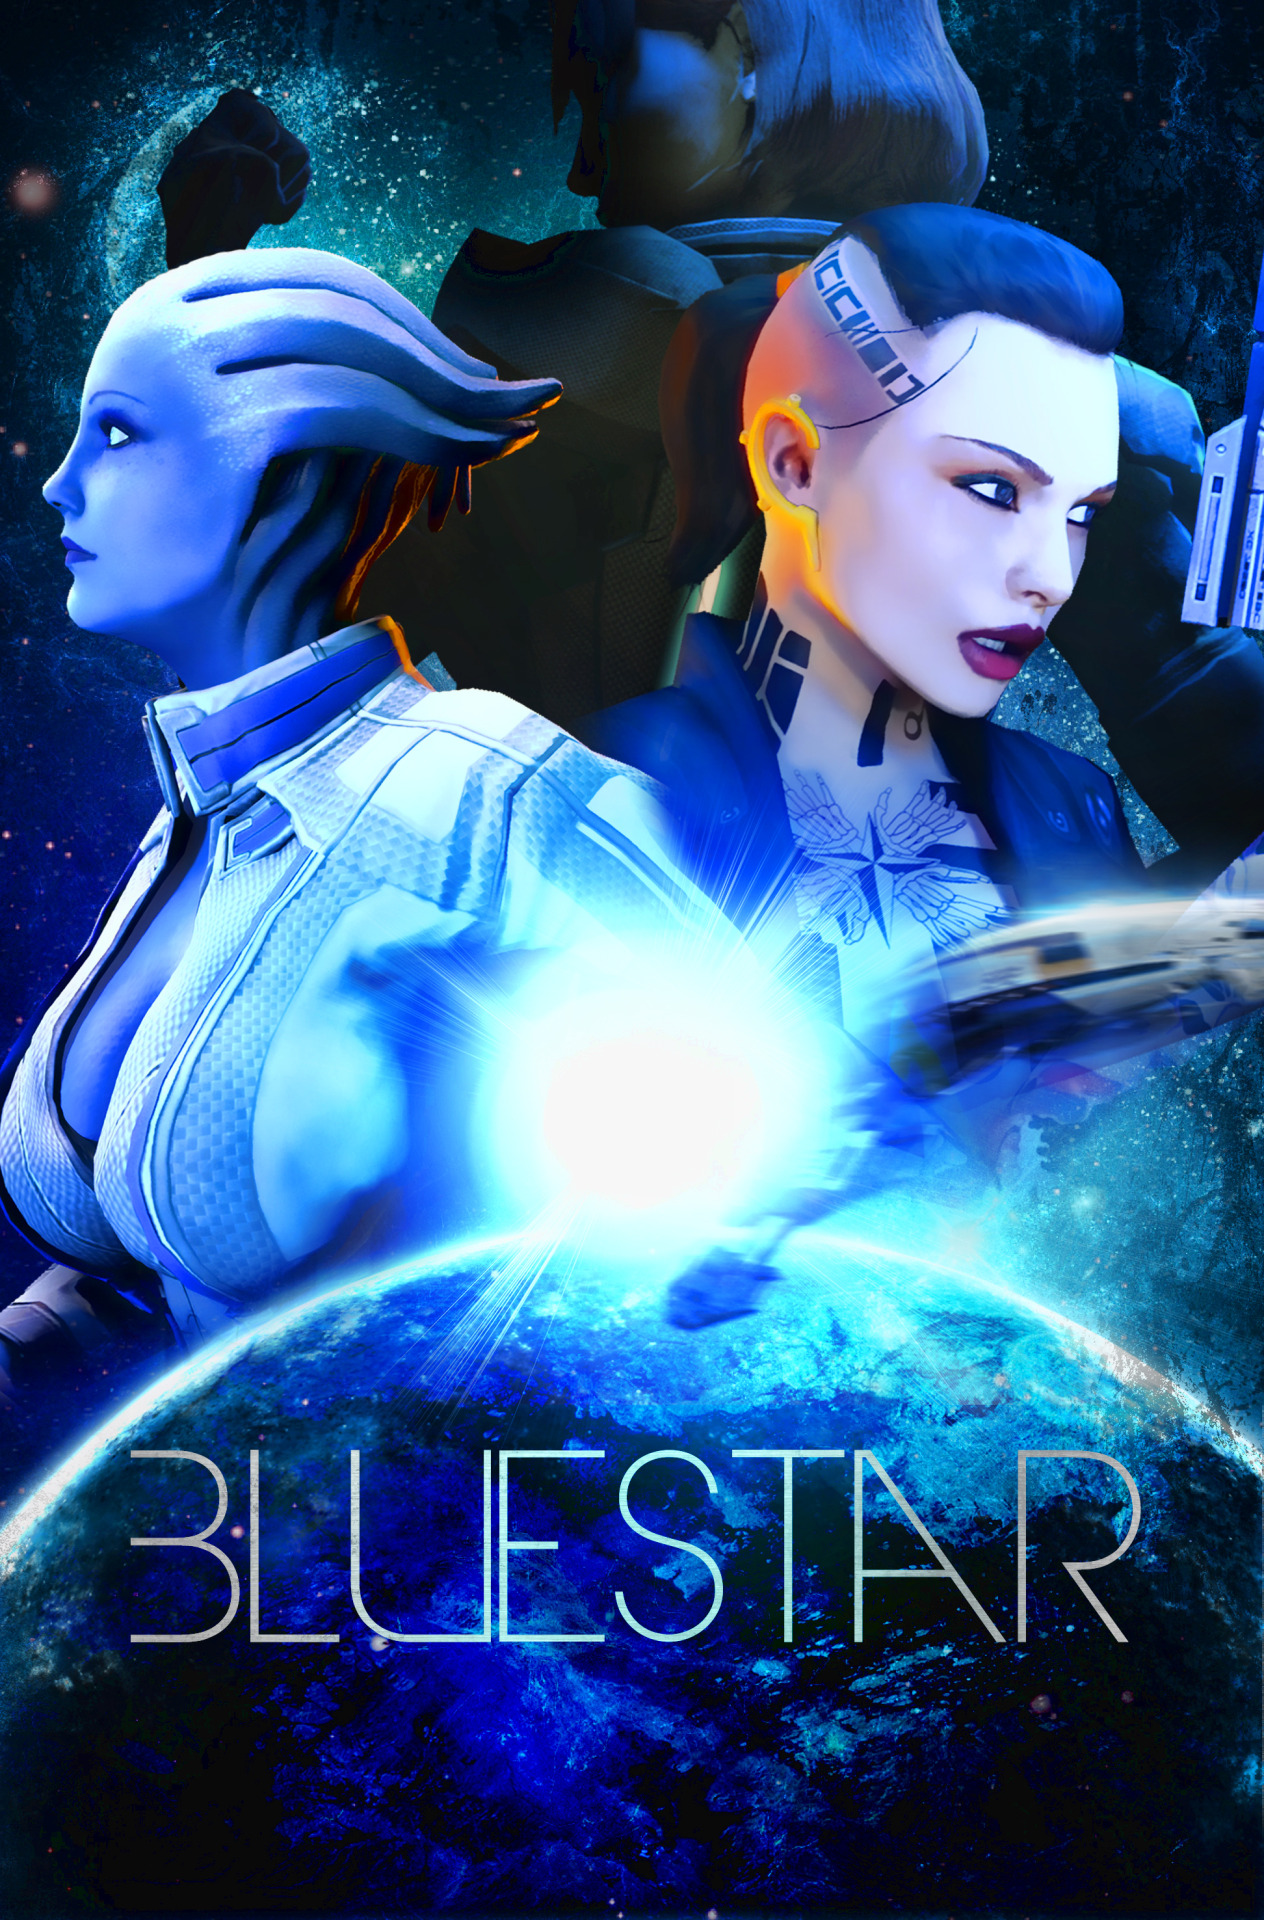 lordaardvarksfm:  Blue Star Poster - by 1kmspaint Click for full-size So while I